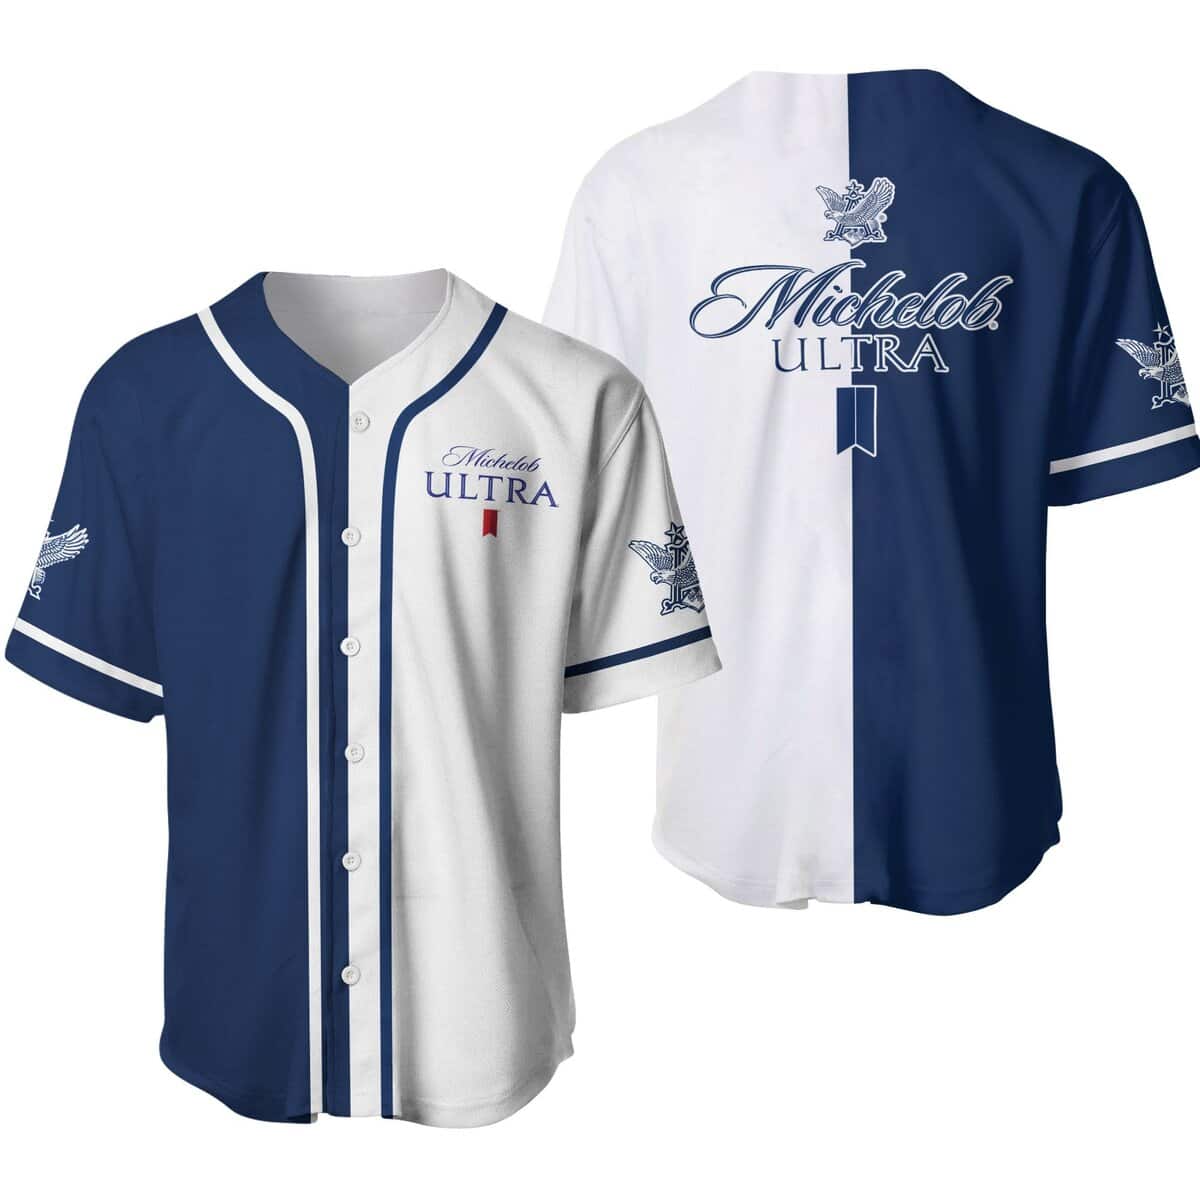 Michelob ULTRA Baseball Jersey Dual Colors Beer Lovers Gift